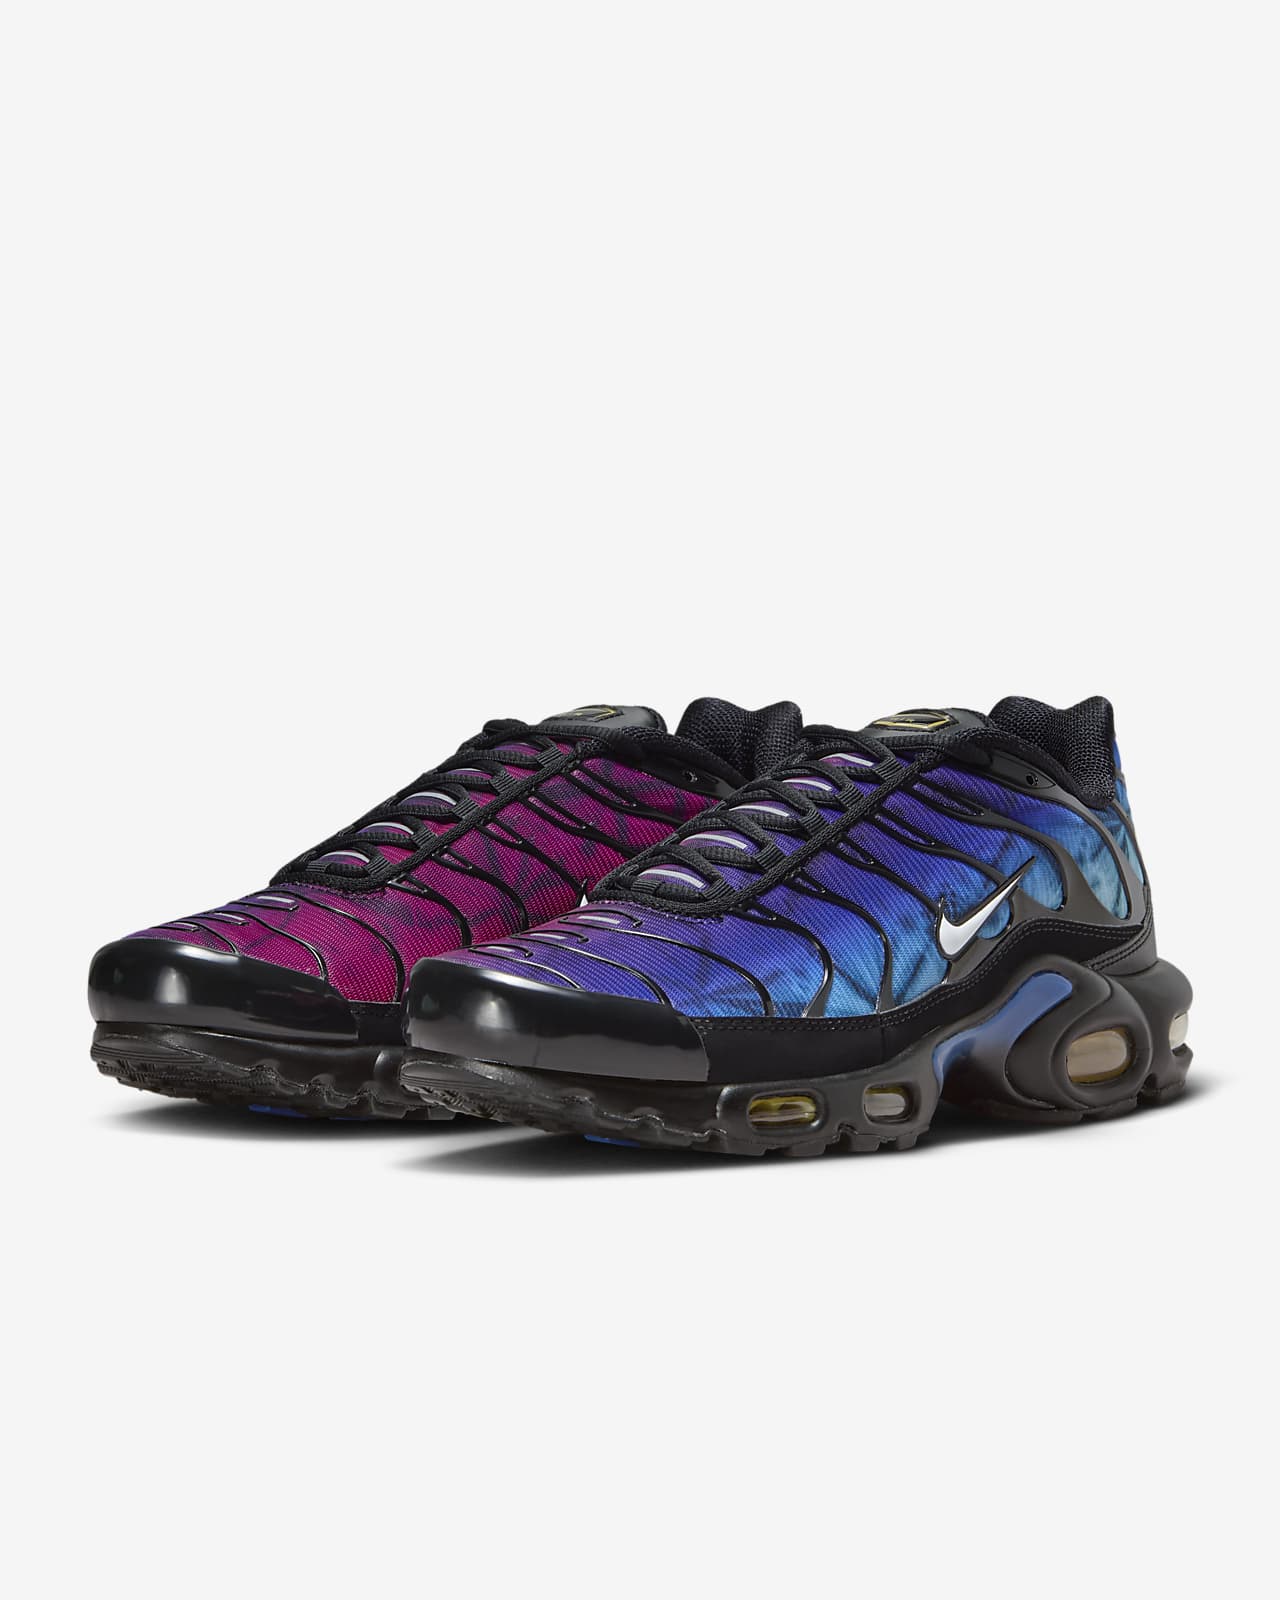 AMAZING! Nike Air Max Plus BLUE GRADIENT On Feet Review 